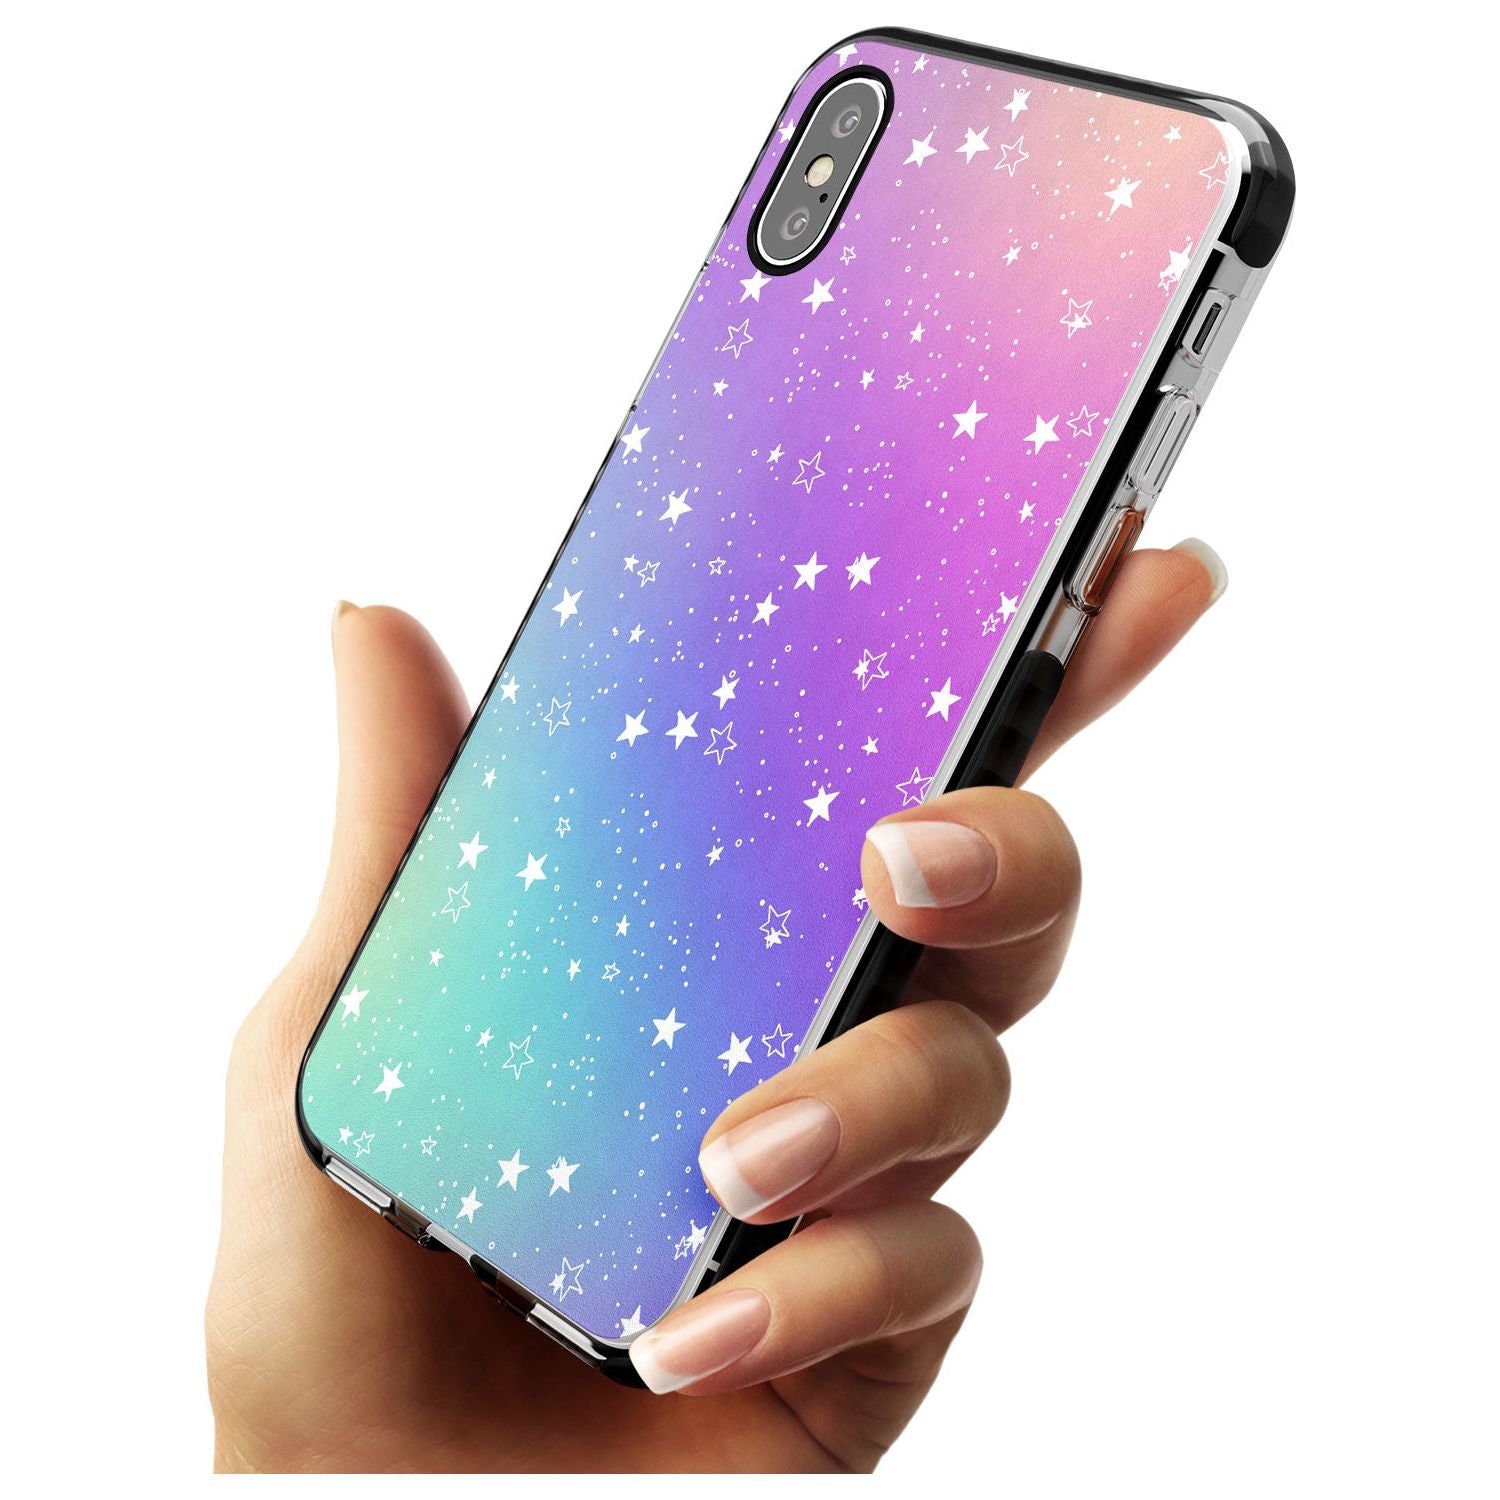 White Stars on Pastels Pink Fade Impact Phone Case for iPhone X XS Max XR